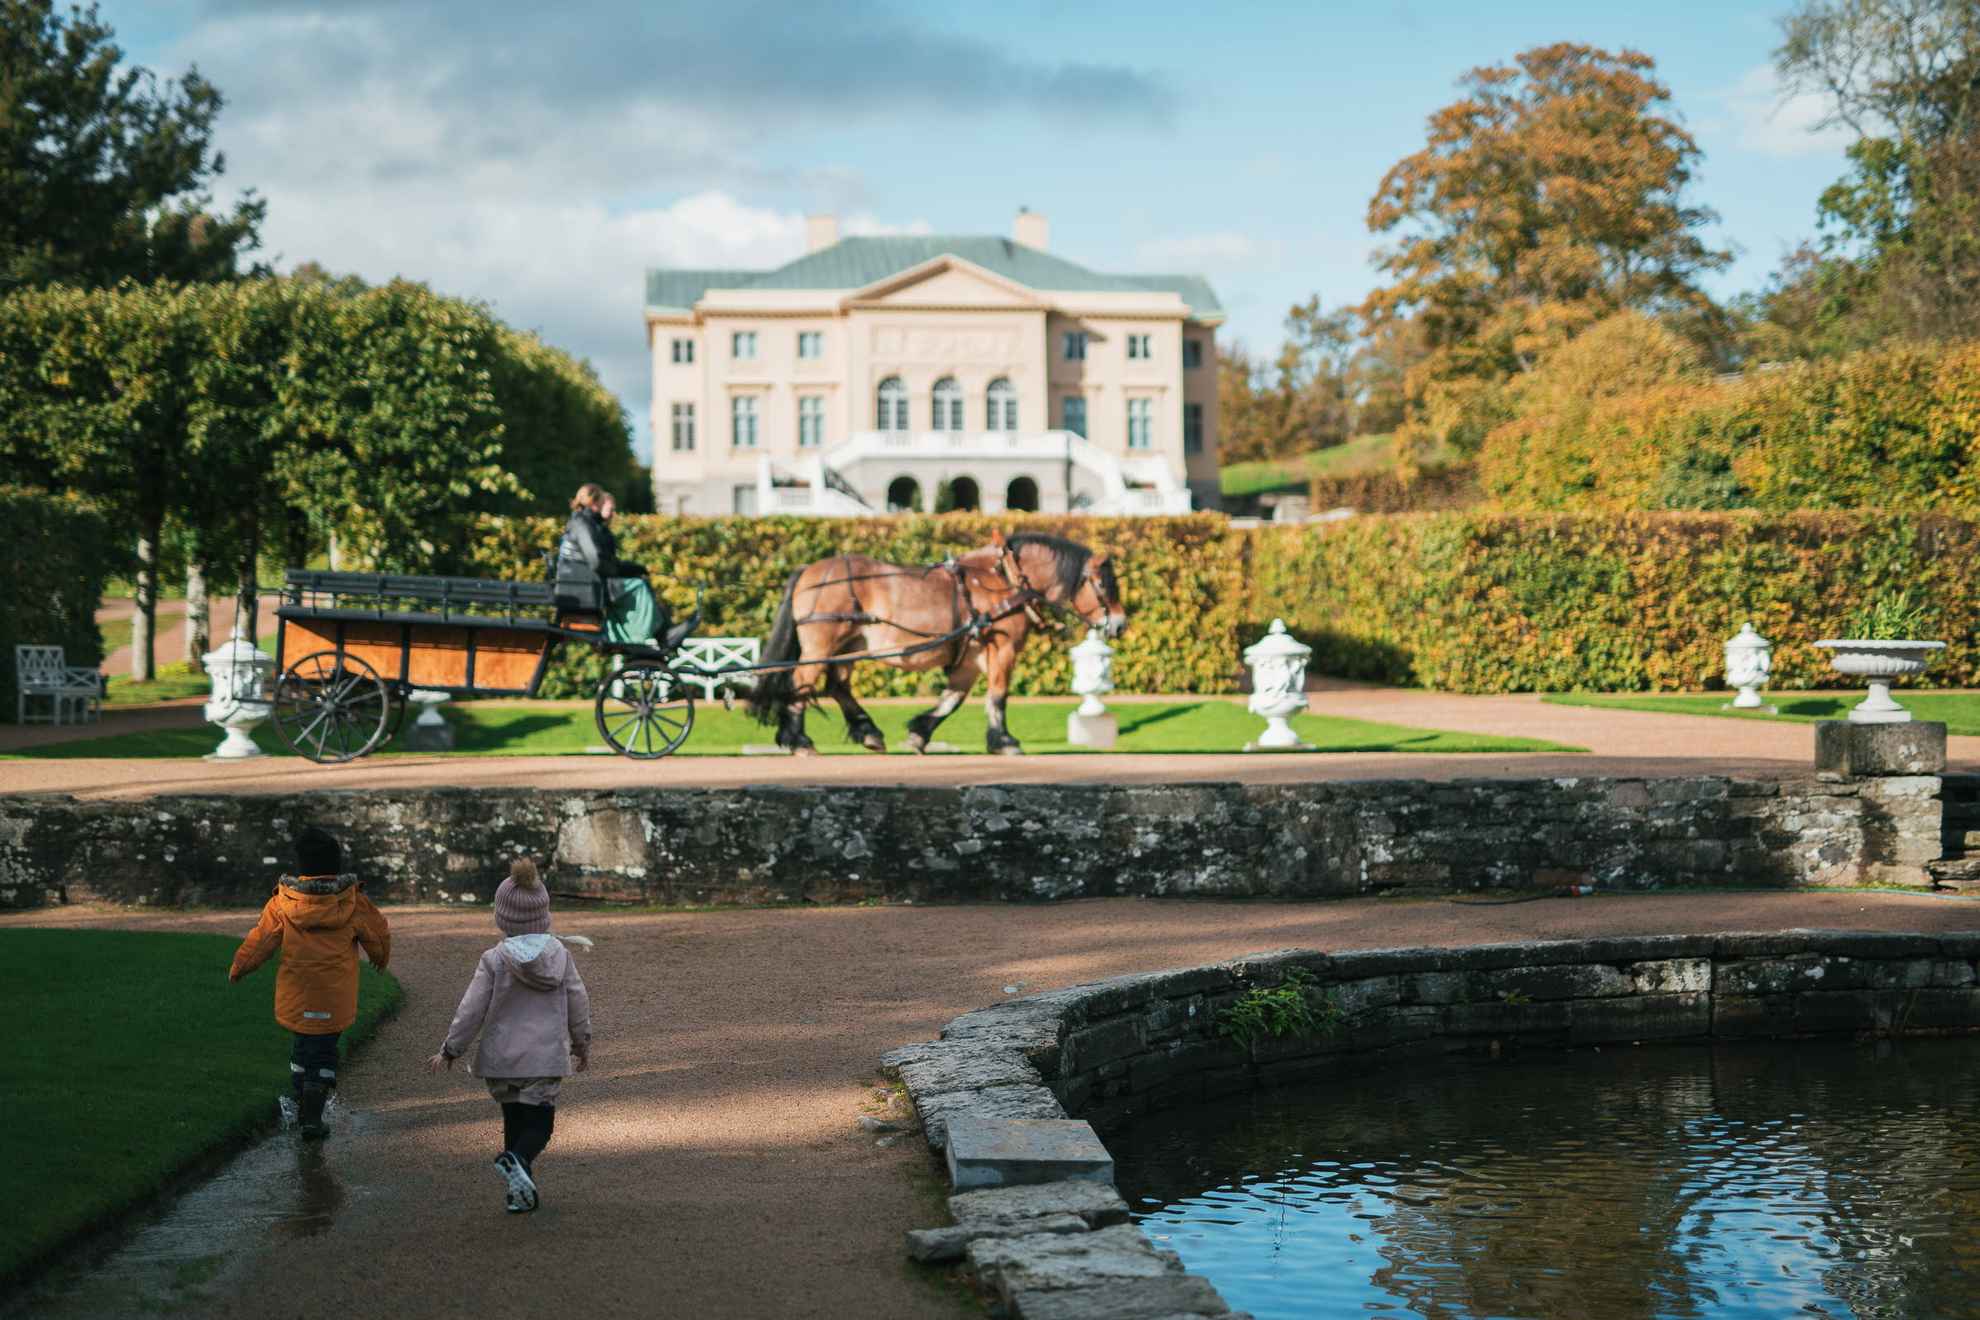 Children walk in a garden. There is a horse drawn carriage behind. A castle in the background.